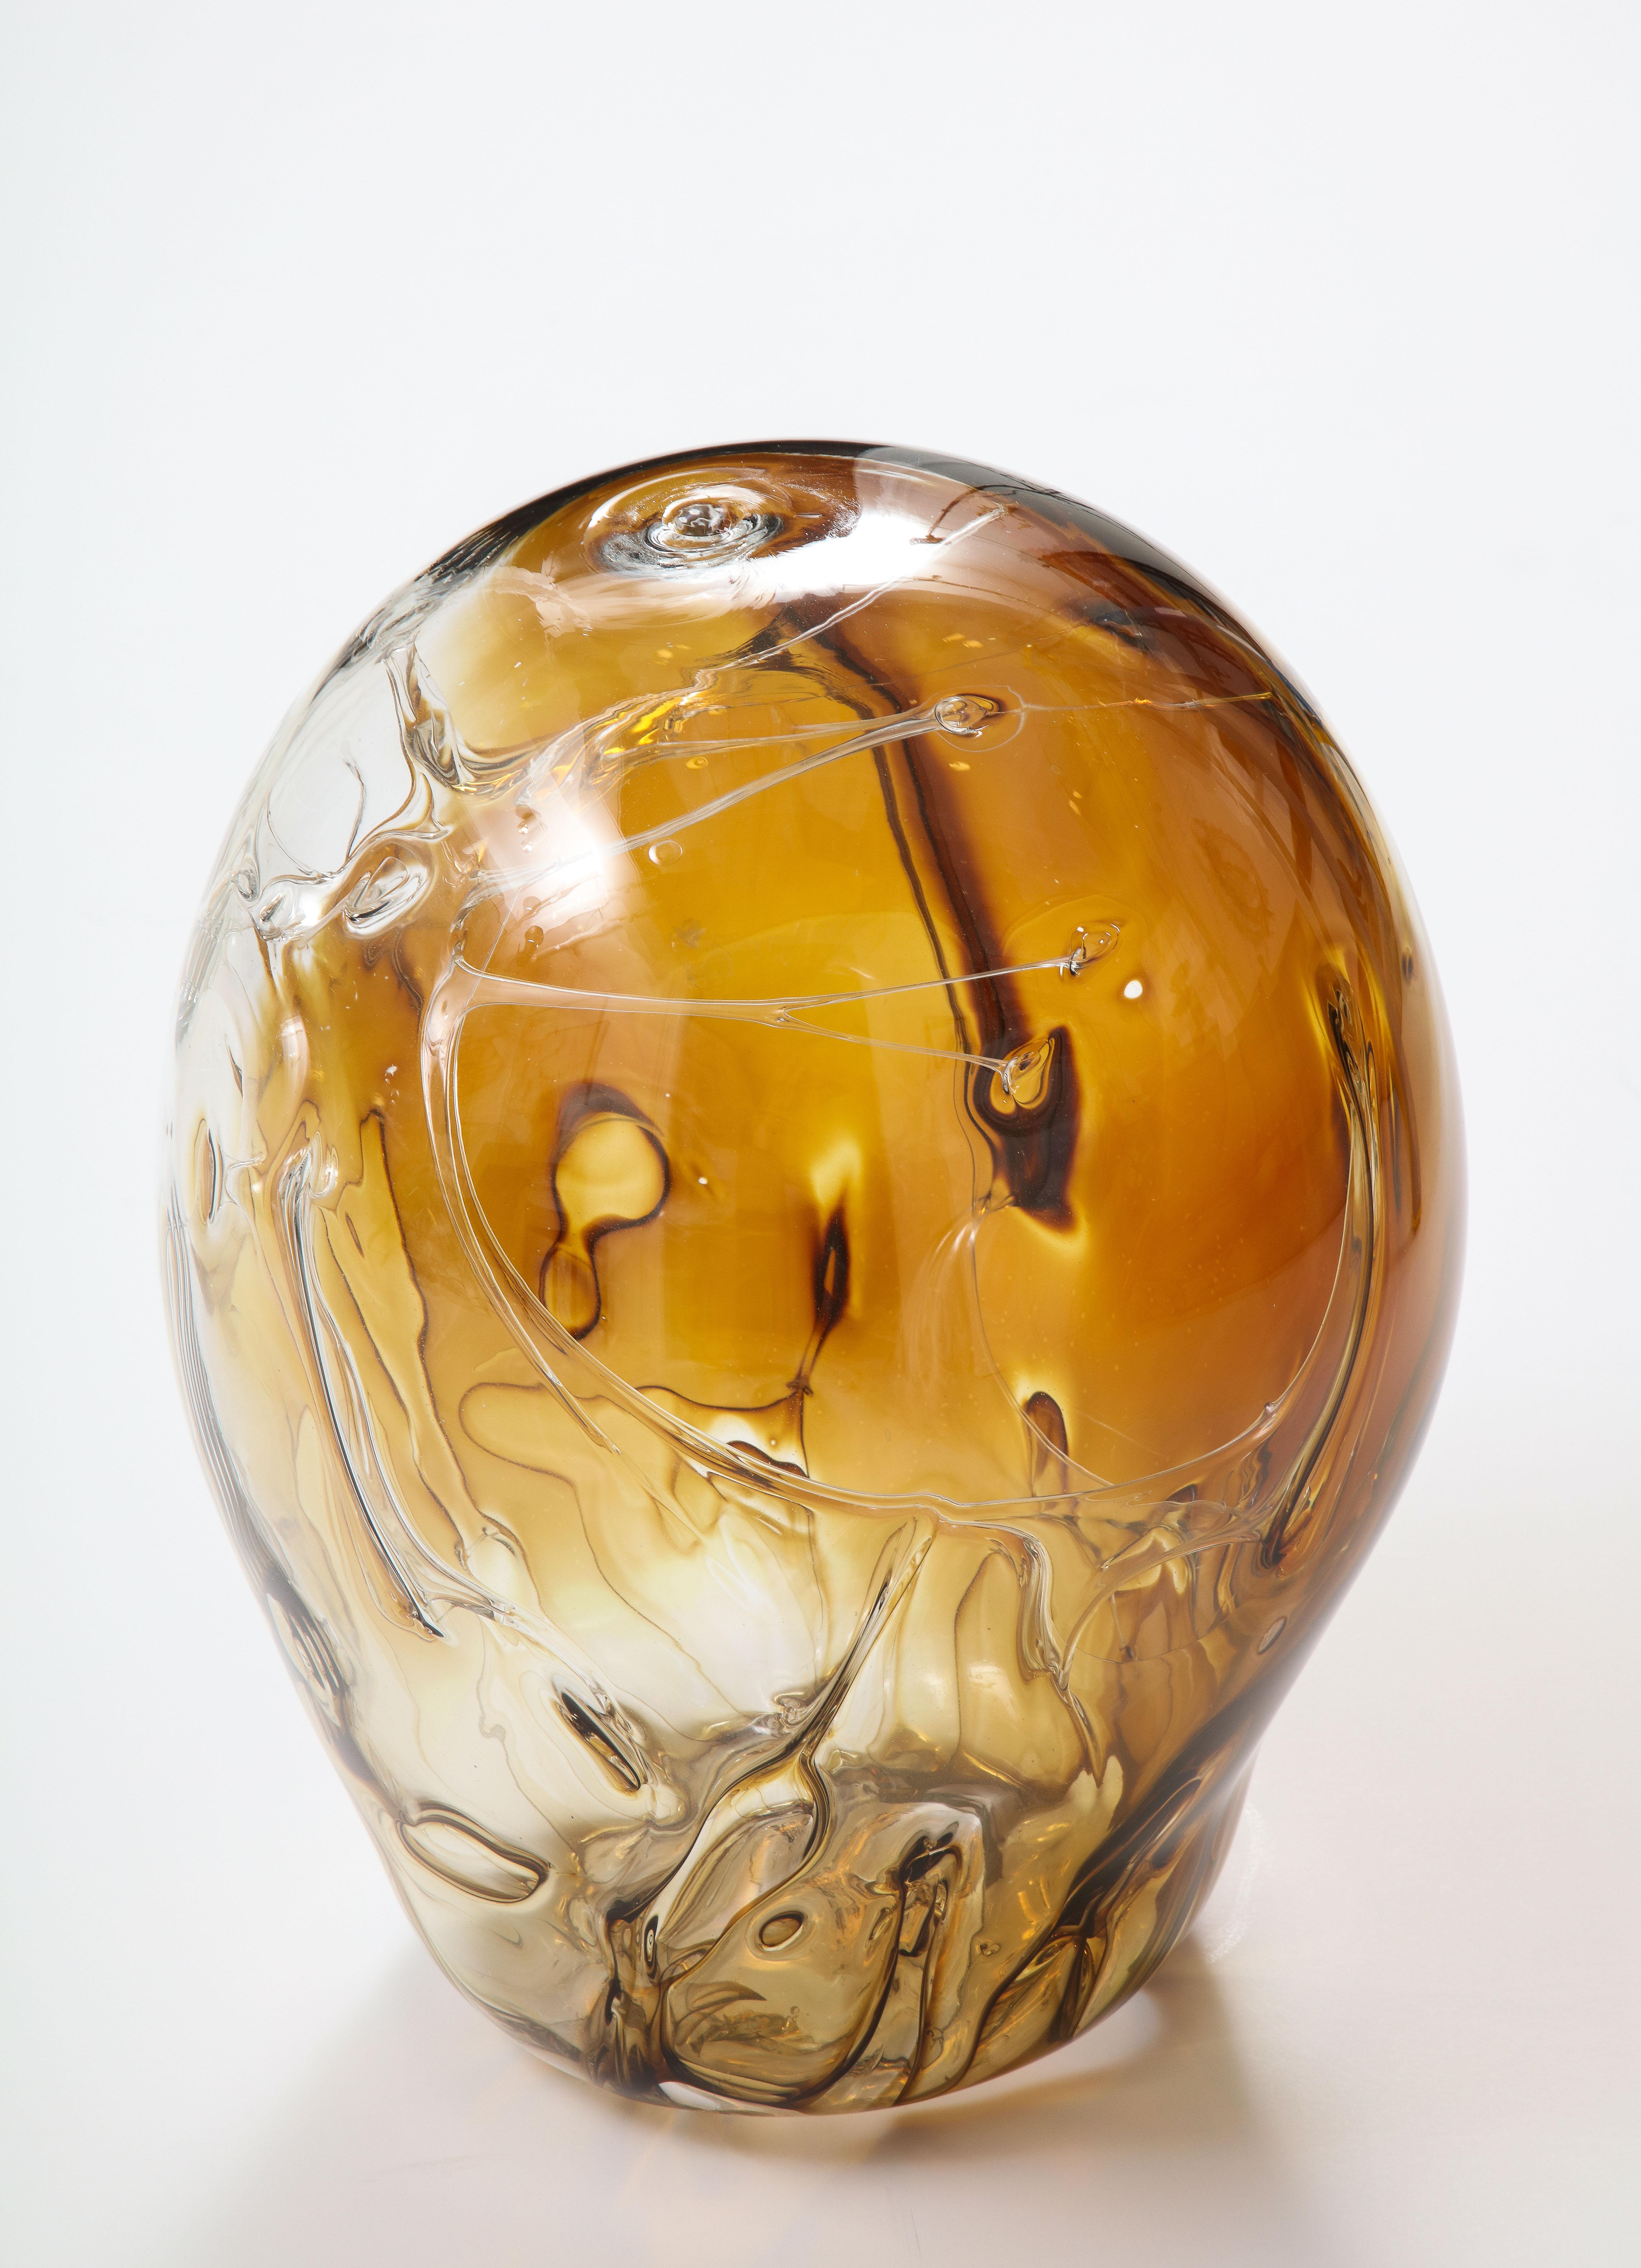 Extra large handblown glass sculpture by Peter Bramhall.
Rare color combination in tones of amber and brown with internal glass threads,
Signed and dated on the bottom.